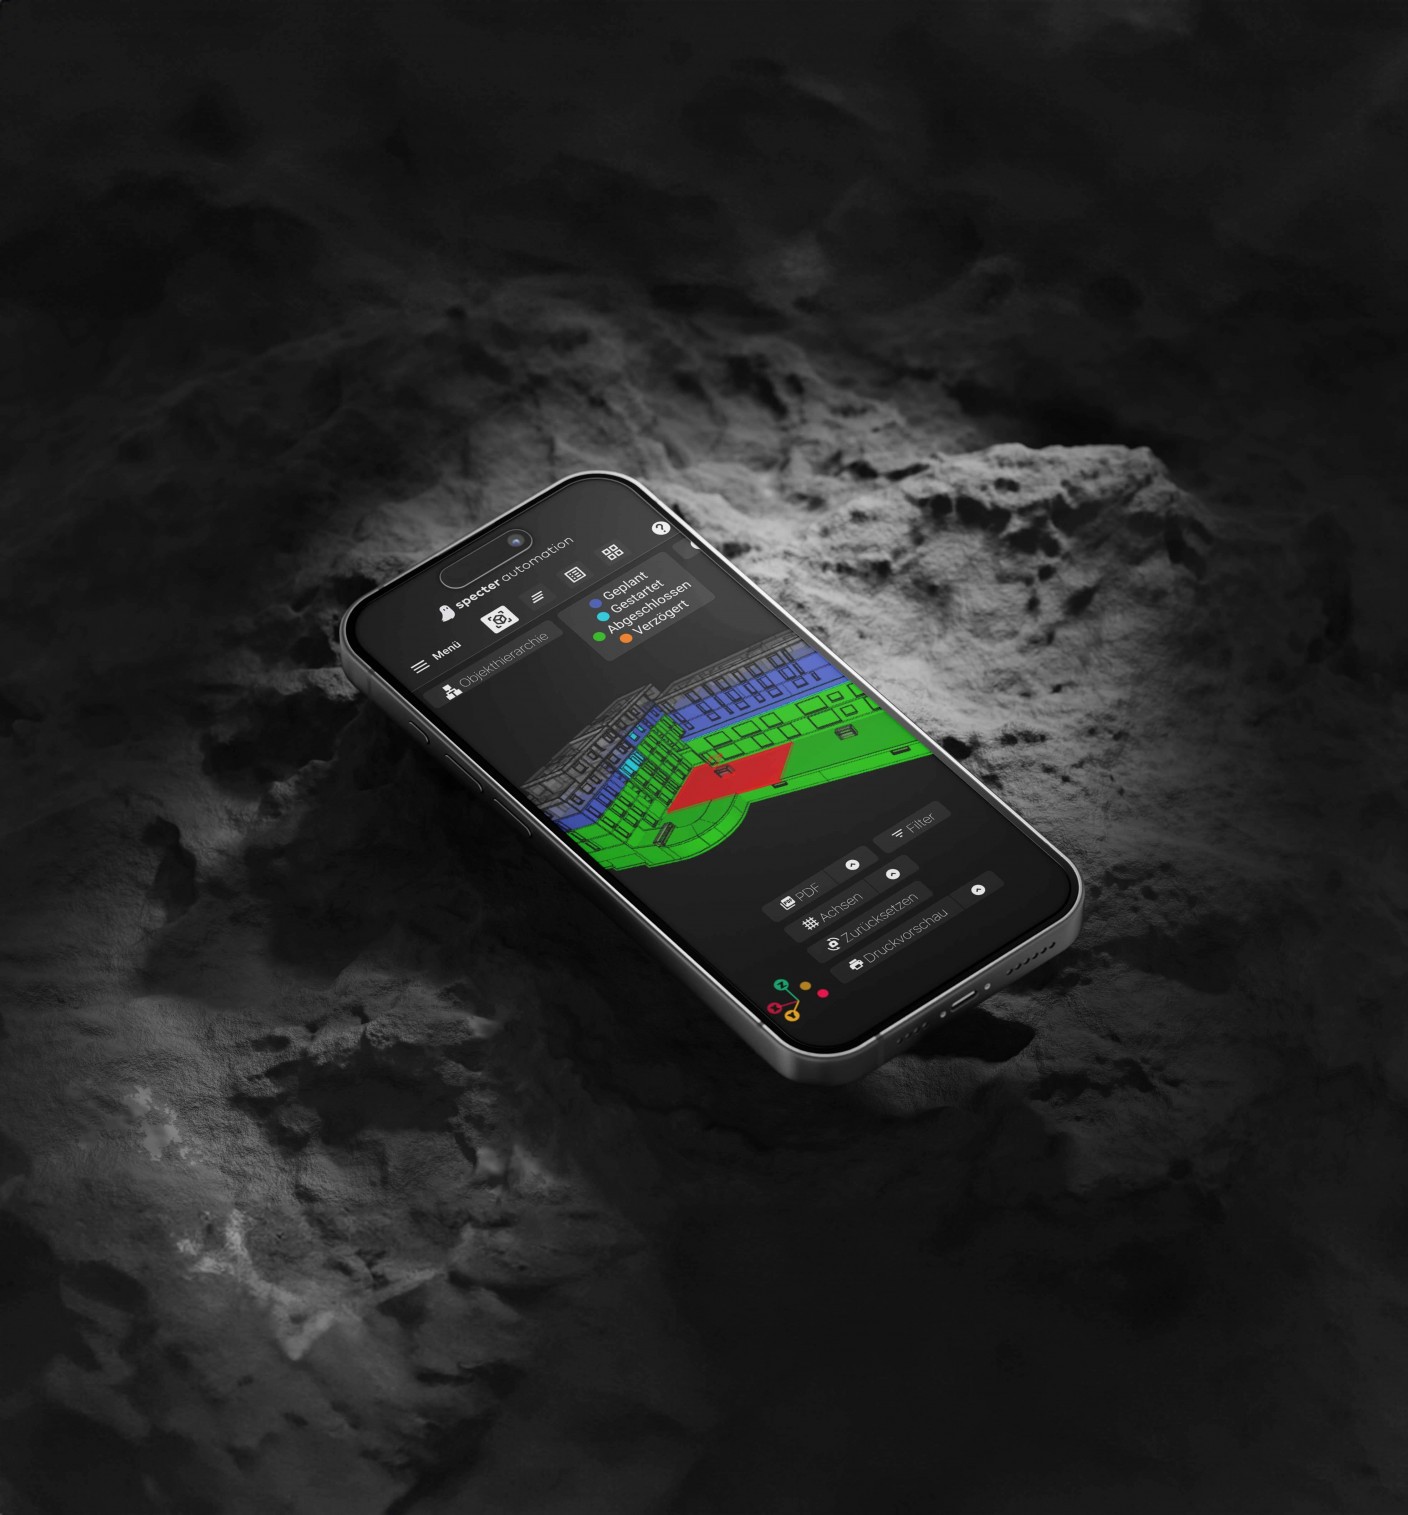 A picture depicting a Phone on Rocks with specter software on it